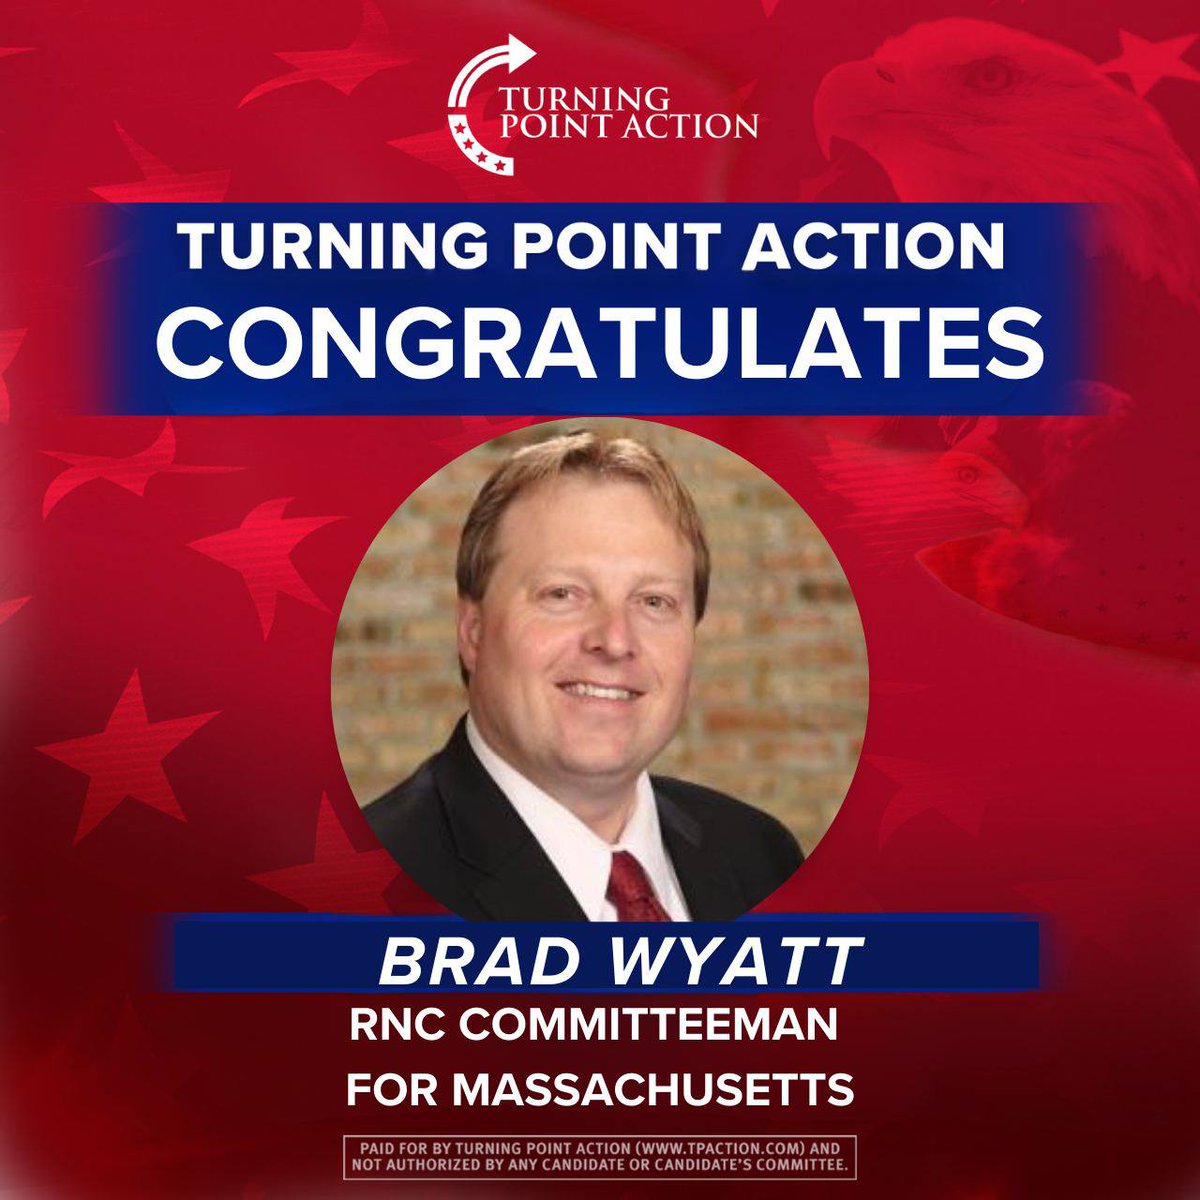 Conservative Win! @TPAction_ would like to congratulate Brad Wyatt defeating a 30 year RNC incumbent who refused to listen to the grassroots last year. Help make sure conservatives are winning in your state. TPAction.com/GetInvolved Congrats @MassGOP!